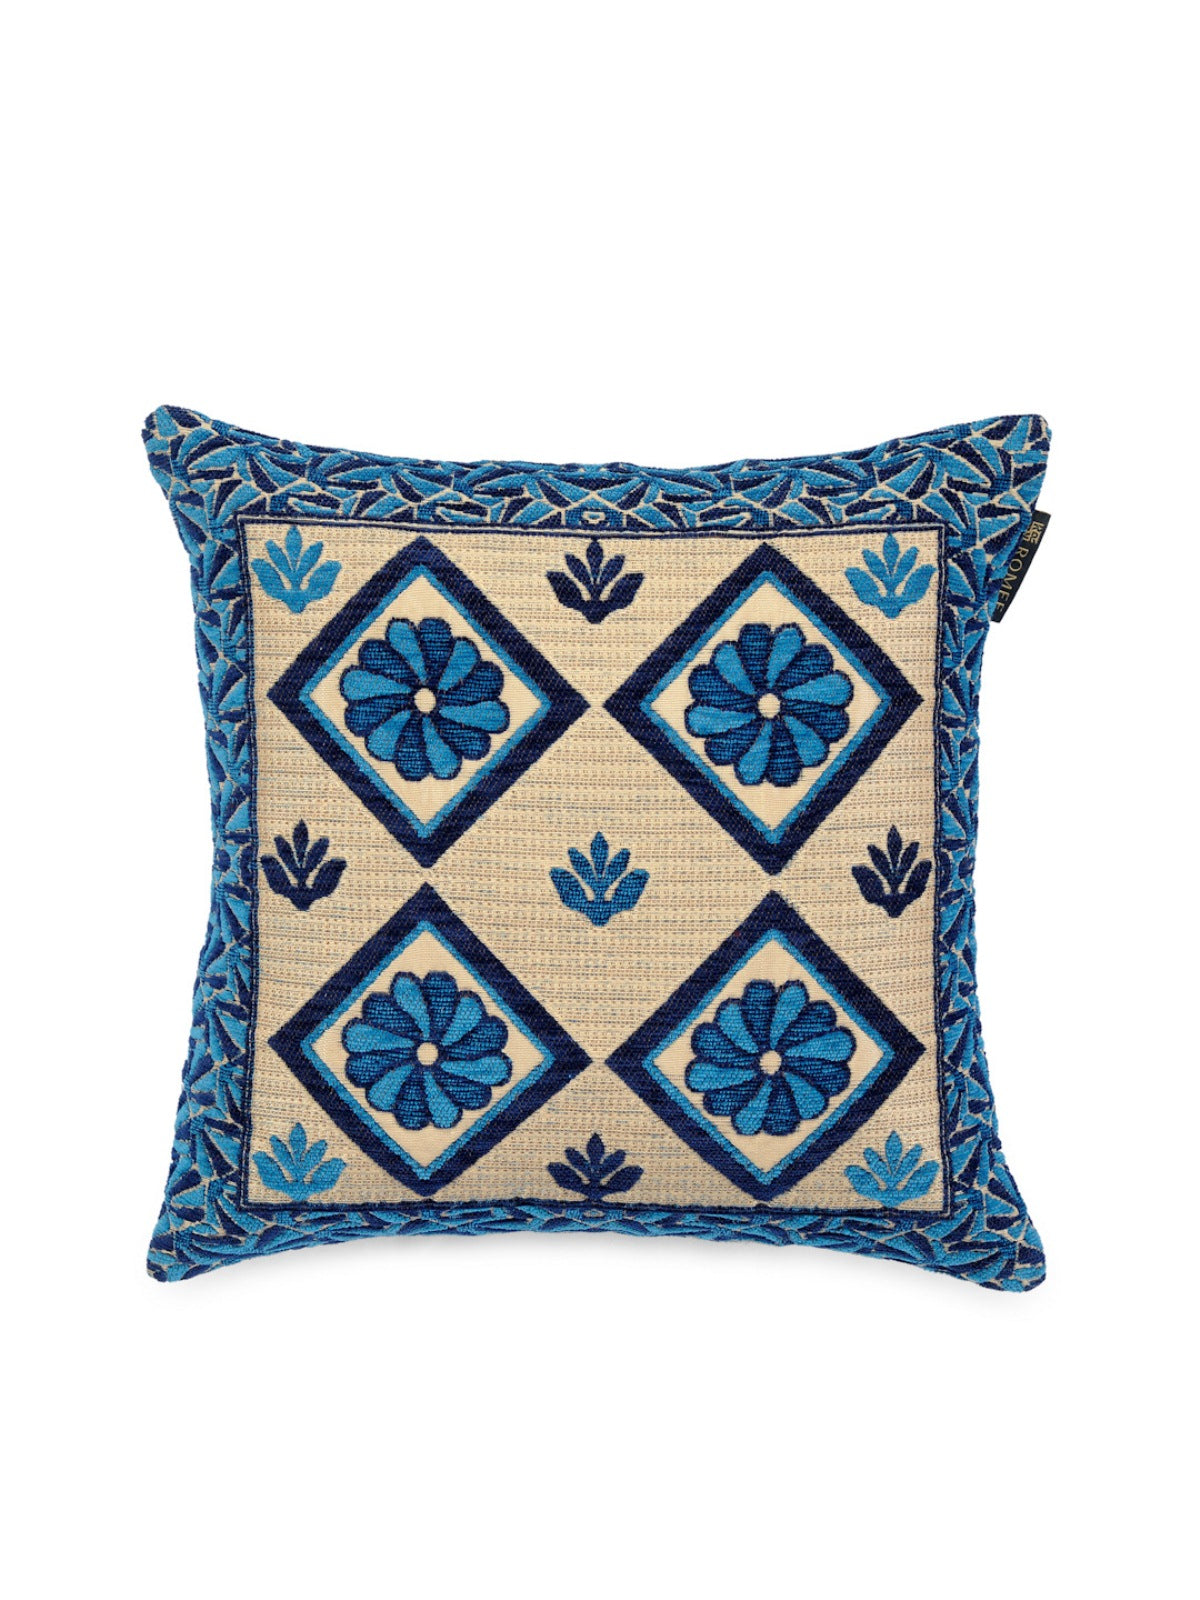 Soft Chenille Floral Throw Pillow/Cushion Cover 16 inch x 16 inch, Set of 5 - Turquoise Blue